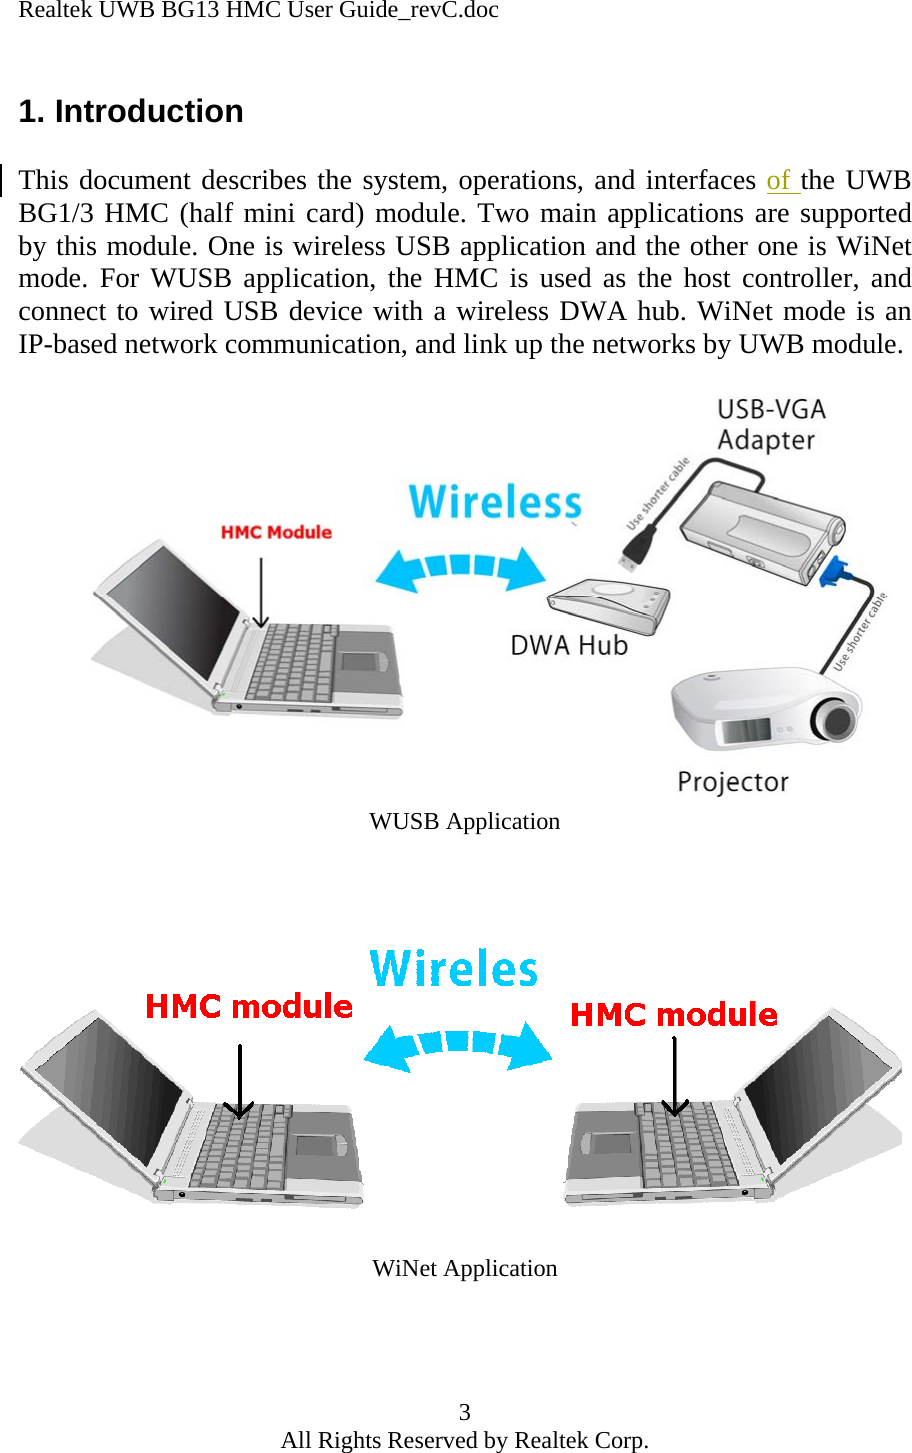 Realtek UWB BG13 HMC User Guide_revC.doc 3 All Rights Reserved by Realtek Corp. 1. Introduction  This document describes the system, operations, and interfaces of the UWB BG1/3 HMC (half mini card) module. Two main applications are supported by this module. One is wireless USB application and the other one is WiNet mode. For WUSB application, the HMC is used as the host controller, and connect to wired USB device with a wireless DWA hub. WiNet mode is an IP-based network communication, and link up the networks by UWB module.                 WUSB Application WiNet Application    